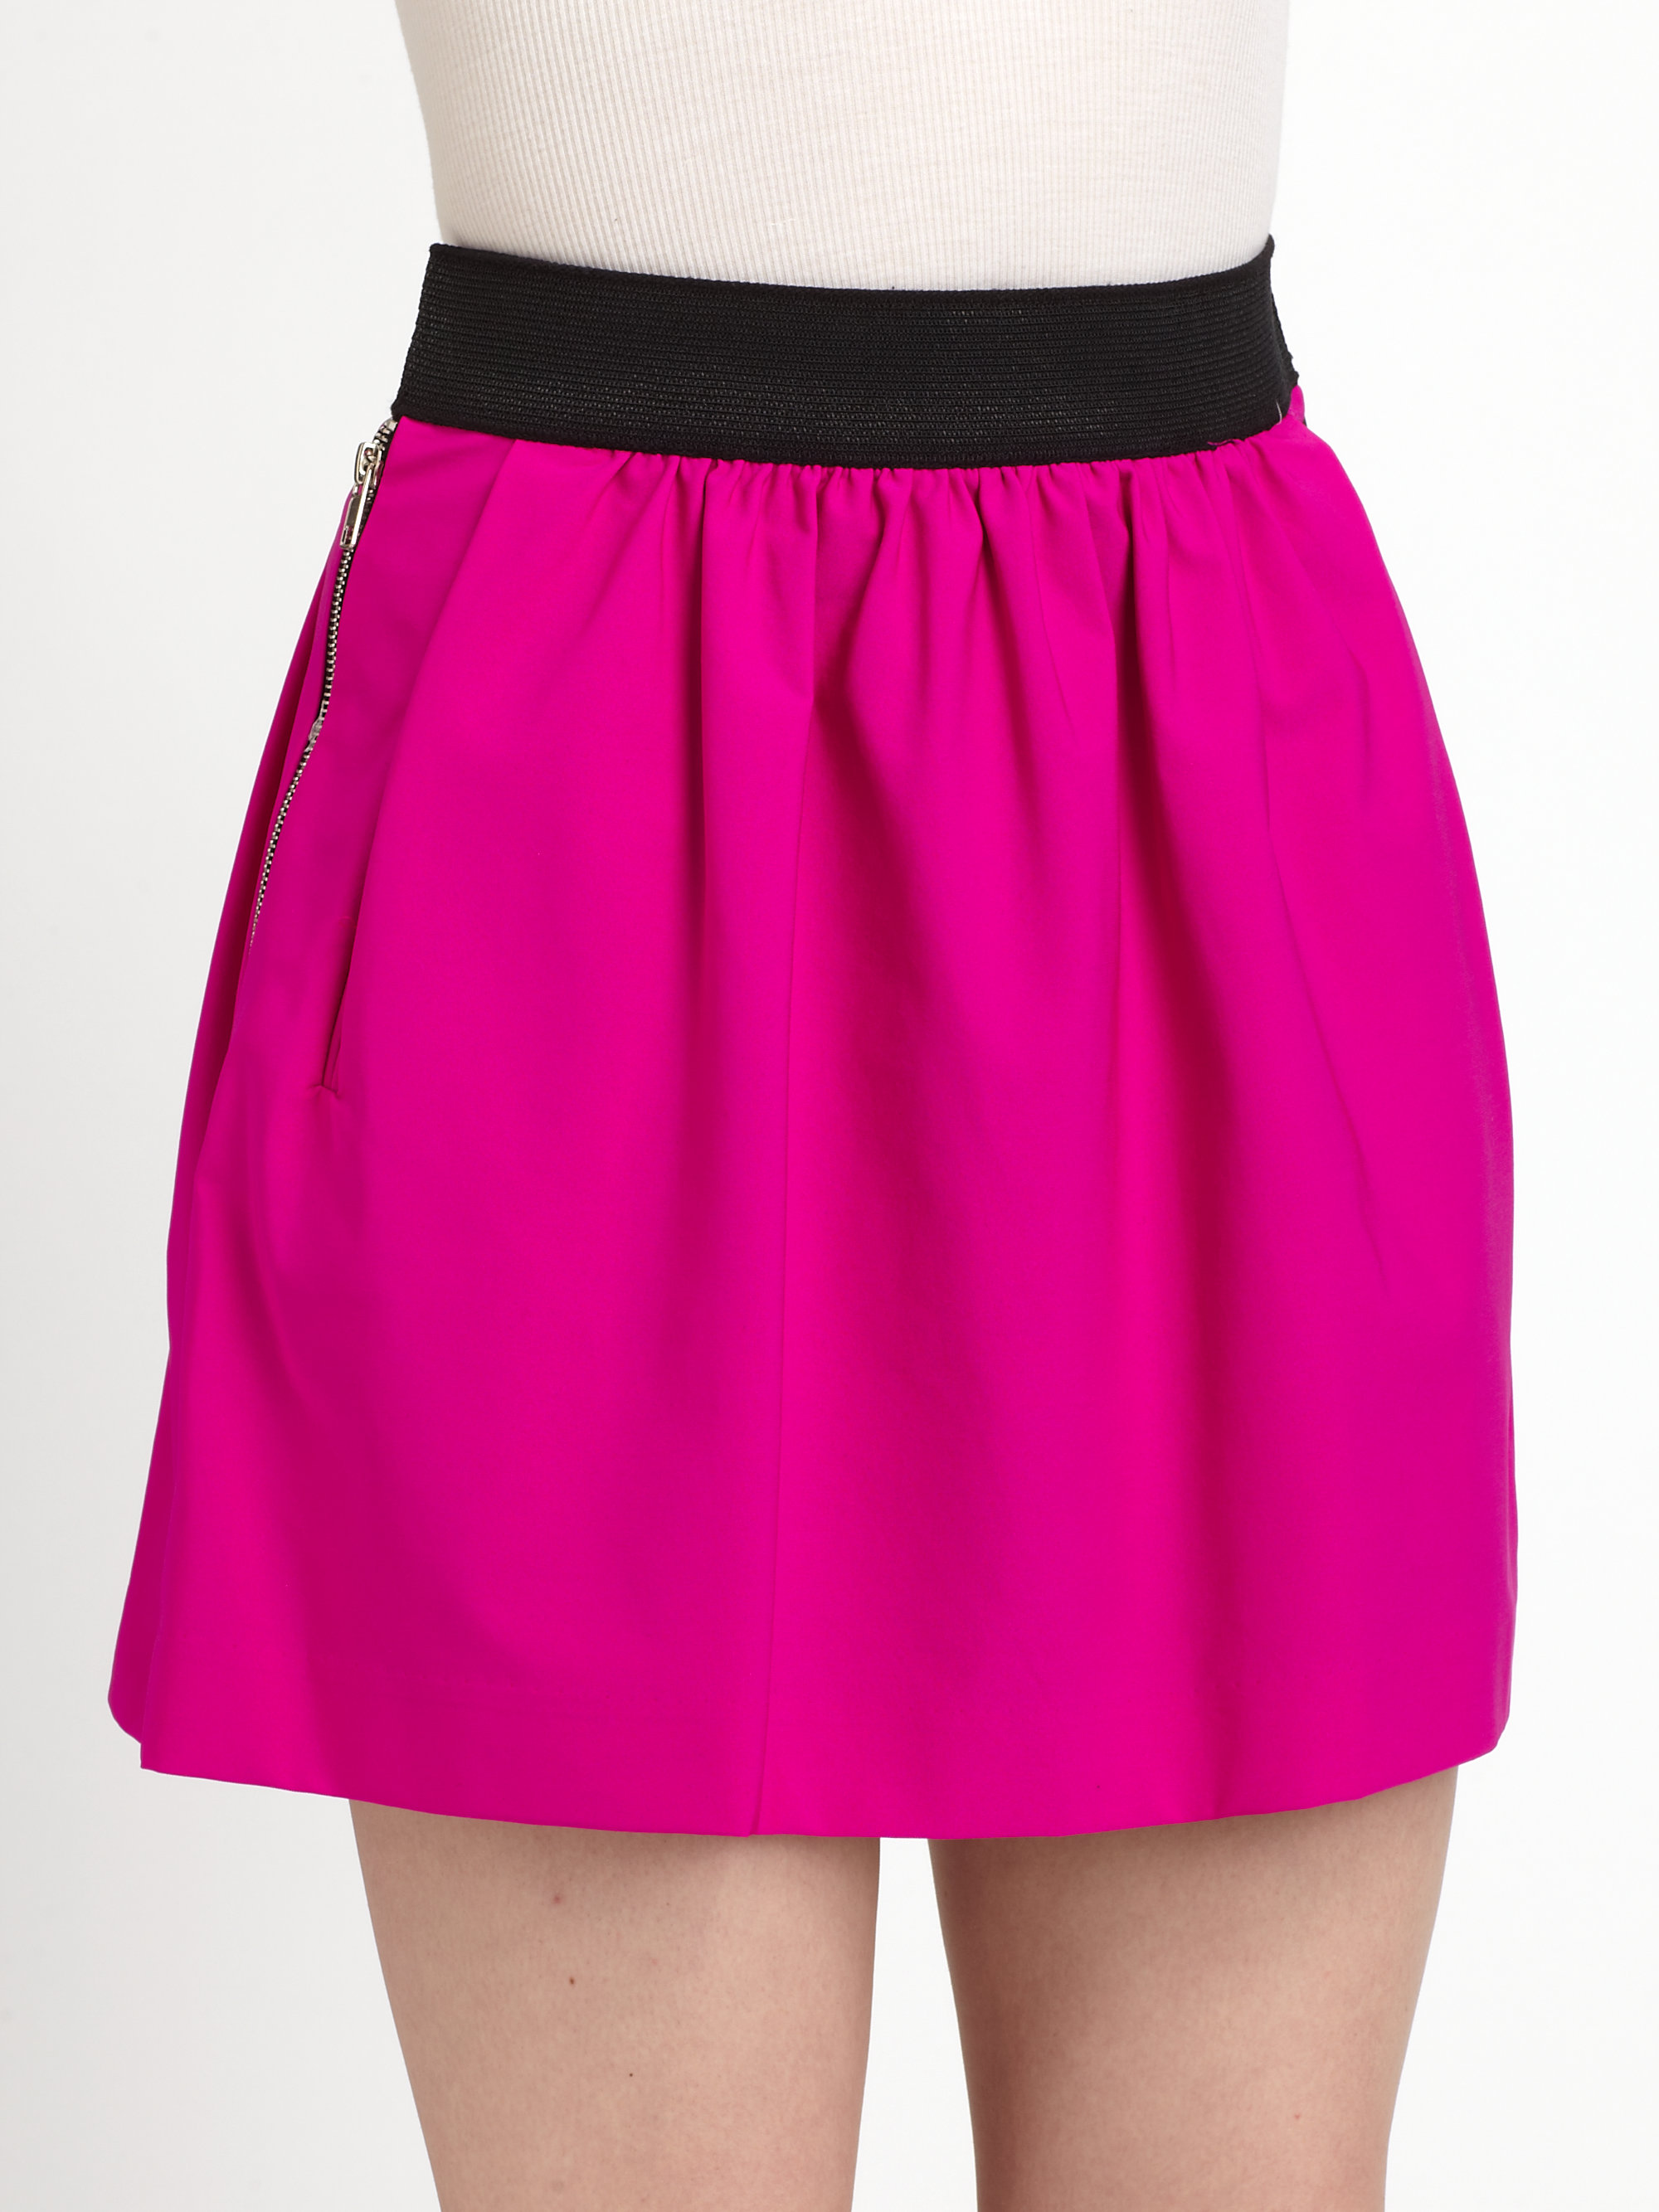 Milly Erin Stretch Crepe Mini Skirt in Pink (SHOCKING PINK) | Lyst